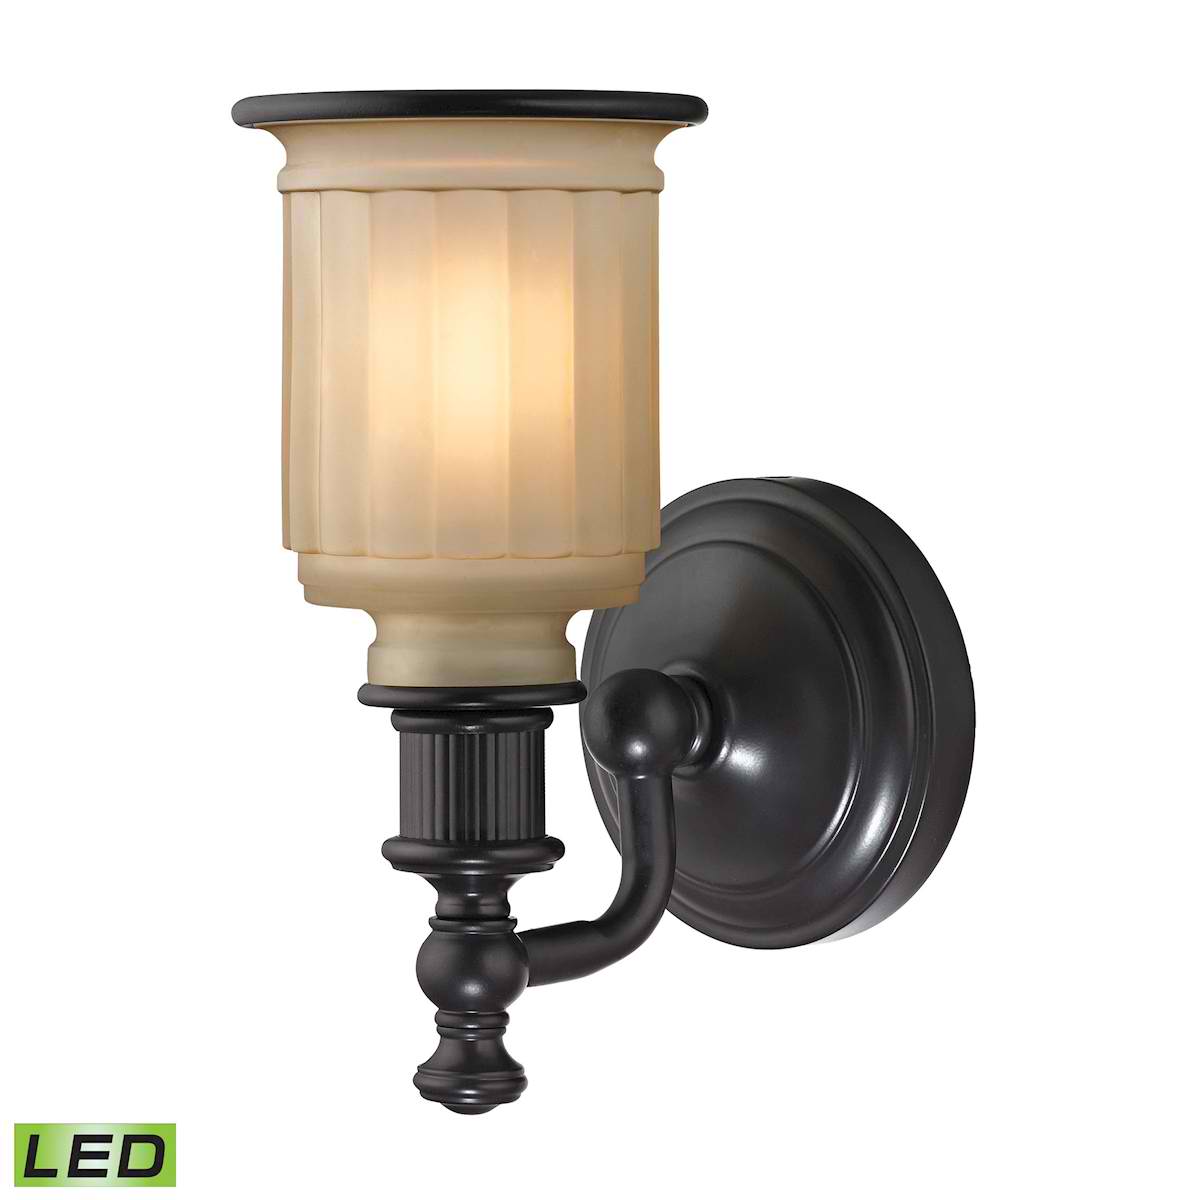 Acadia Collection 1 Light Bath in Oil Rubbed Bronze - LED Offering Up To 800 Lumens (60 Watt Equivalent)